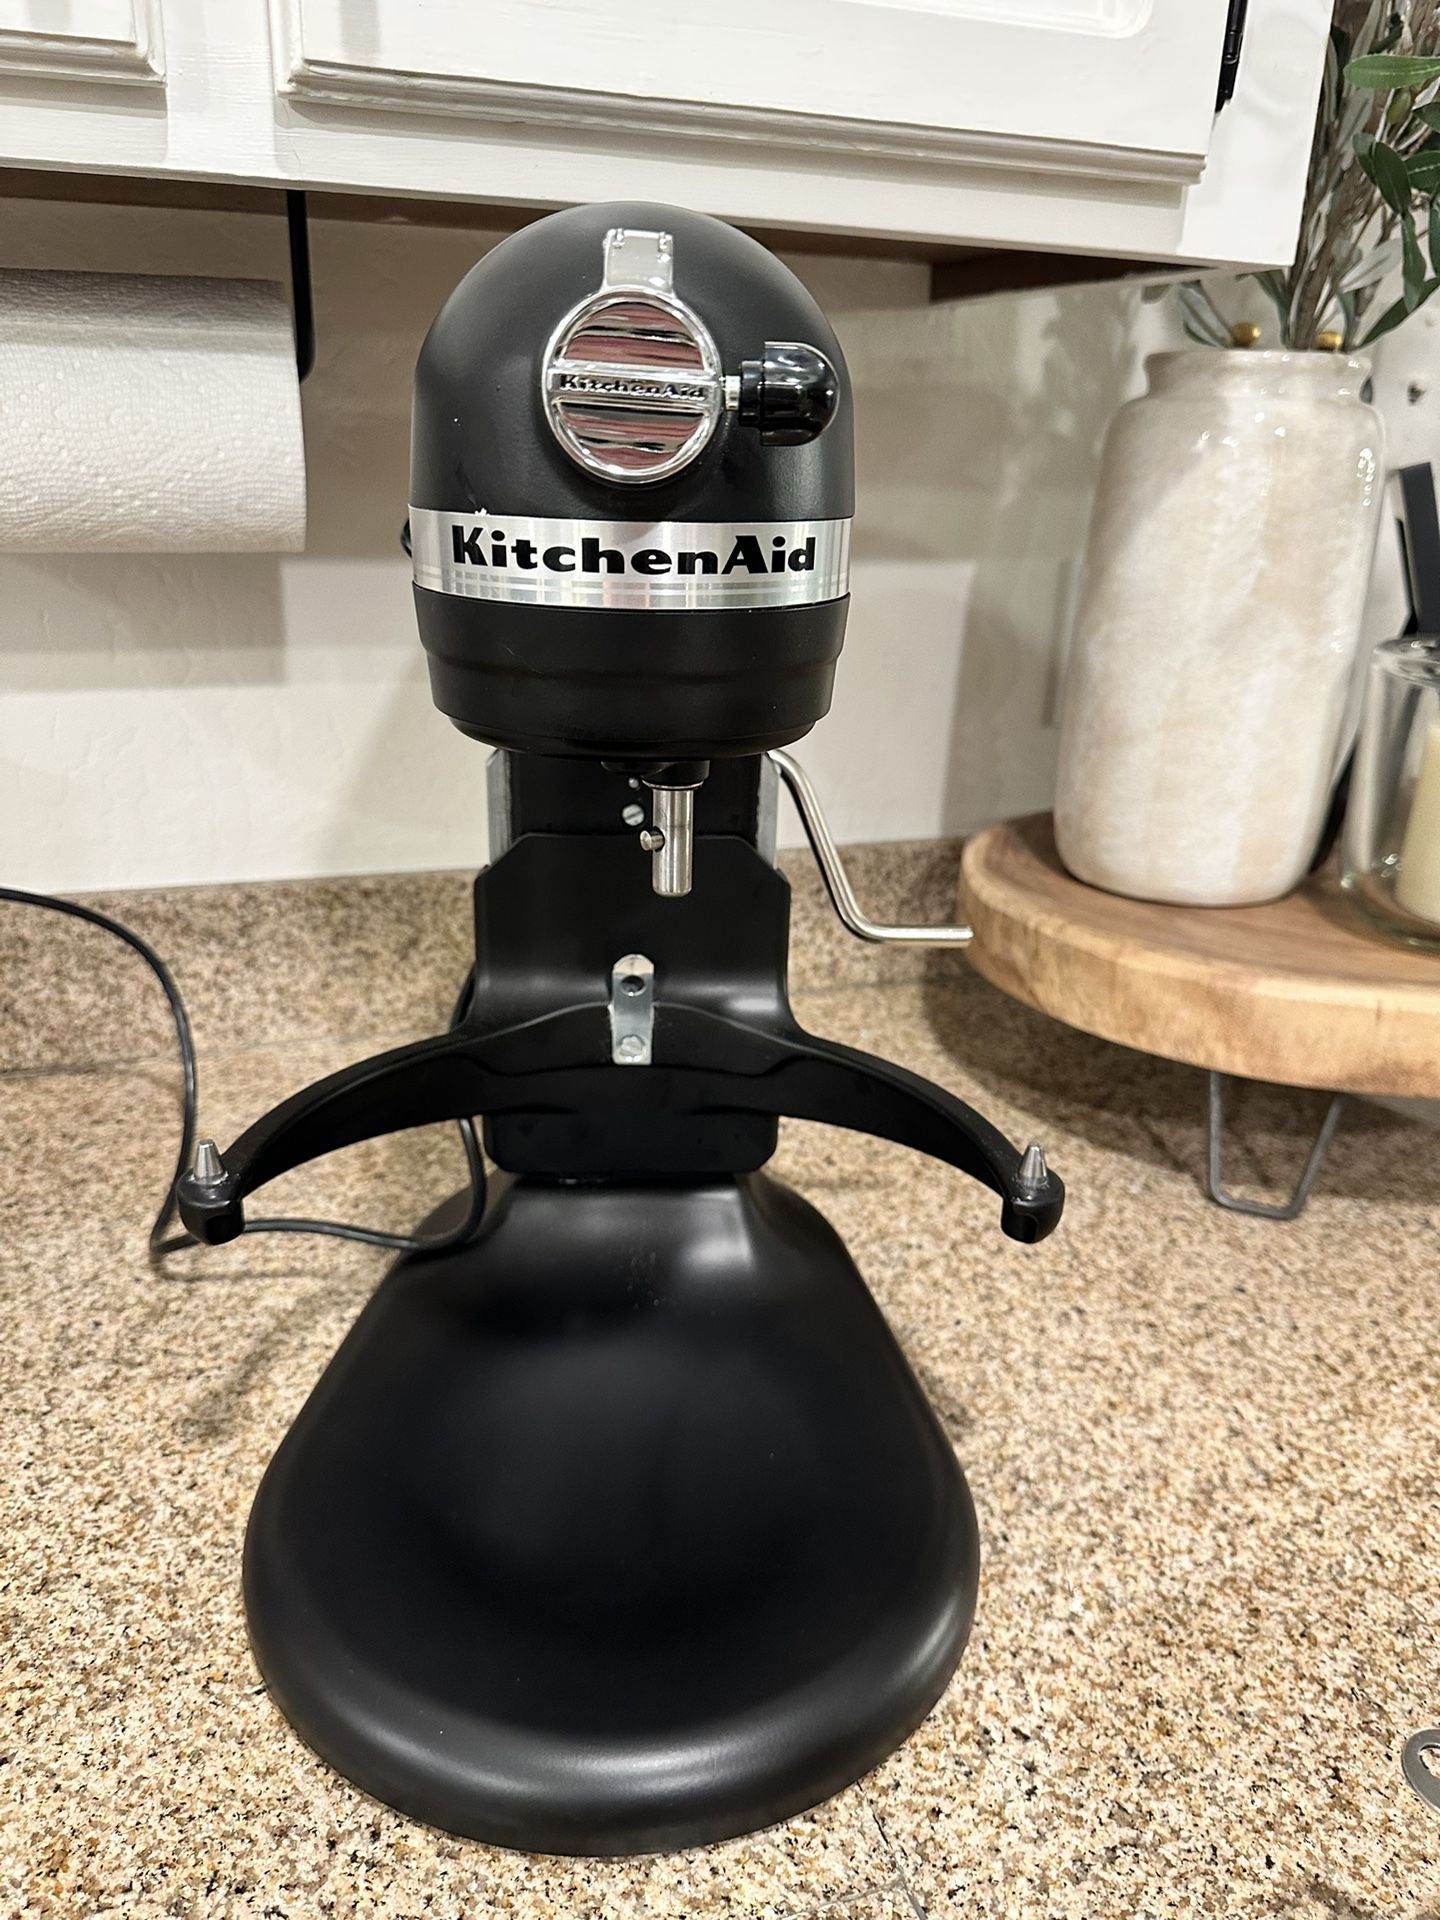 KITCHENAID Deluxe 4.5 Quart Tilt-Head Stand Mixer (Model: KSM97) for Sale  in Loma Linda, CA - OfferUp